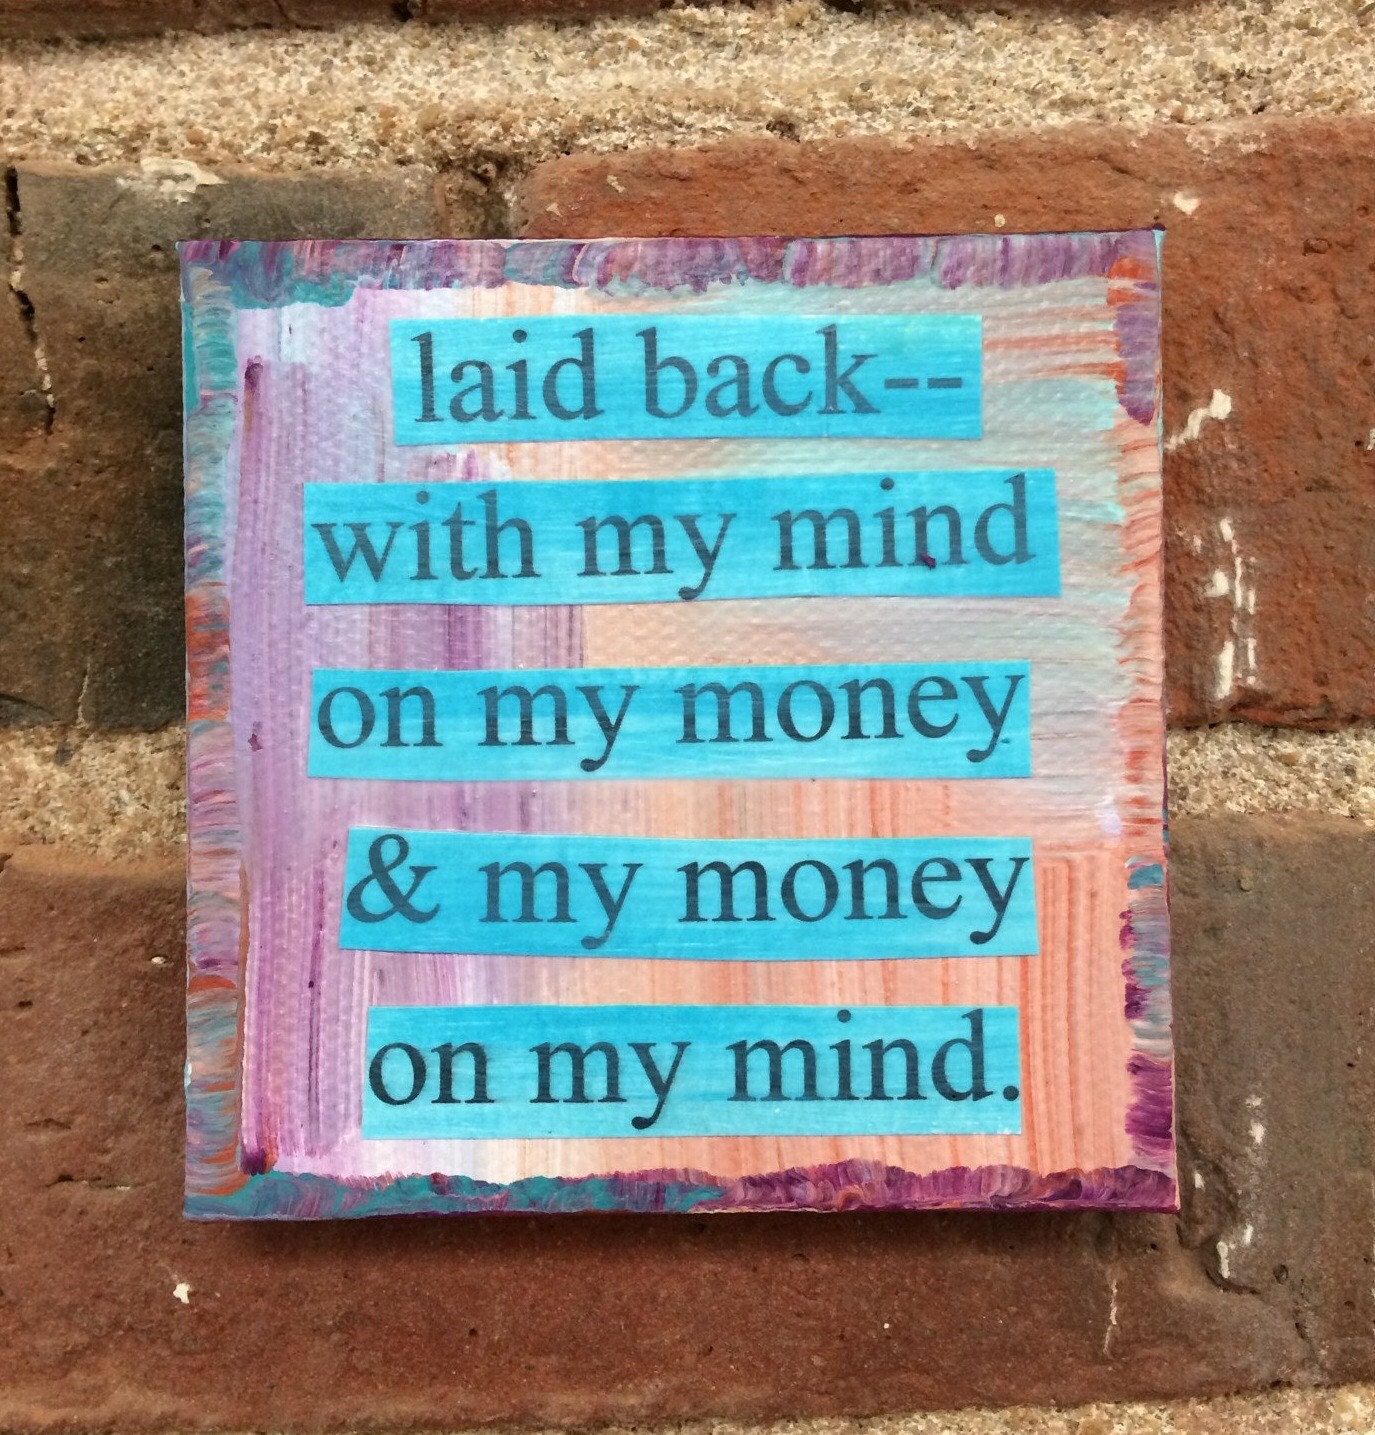 laid back with my mind on my money and my money on my mind.